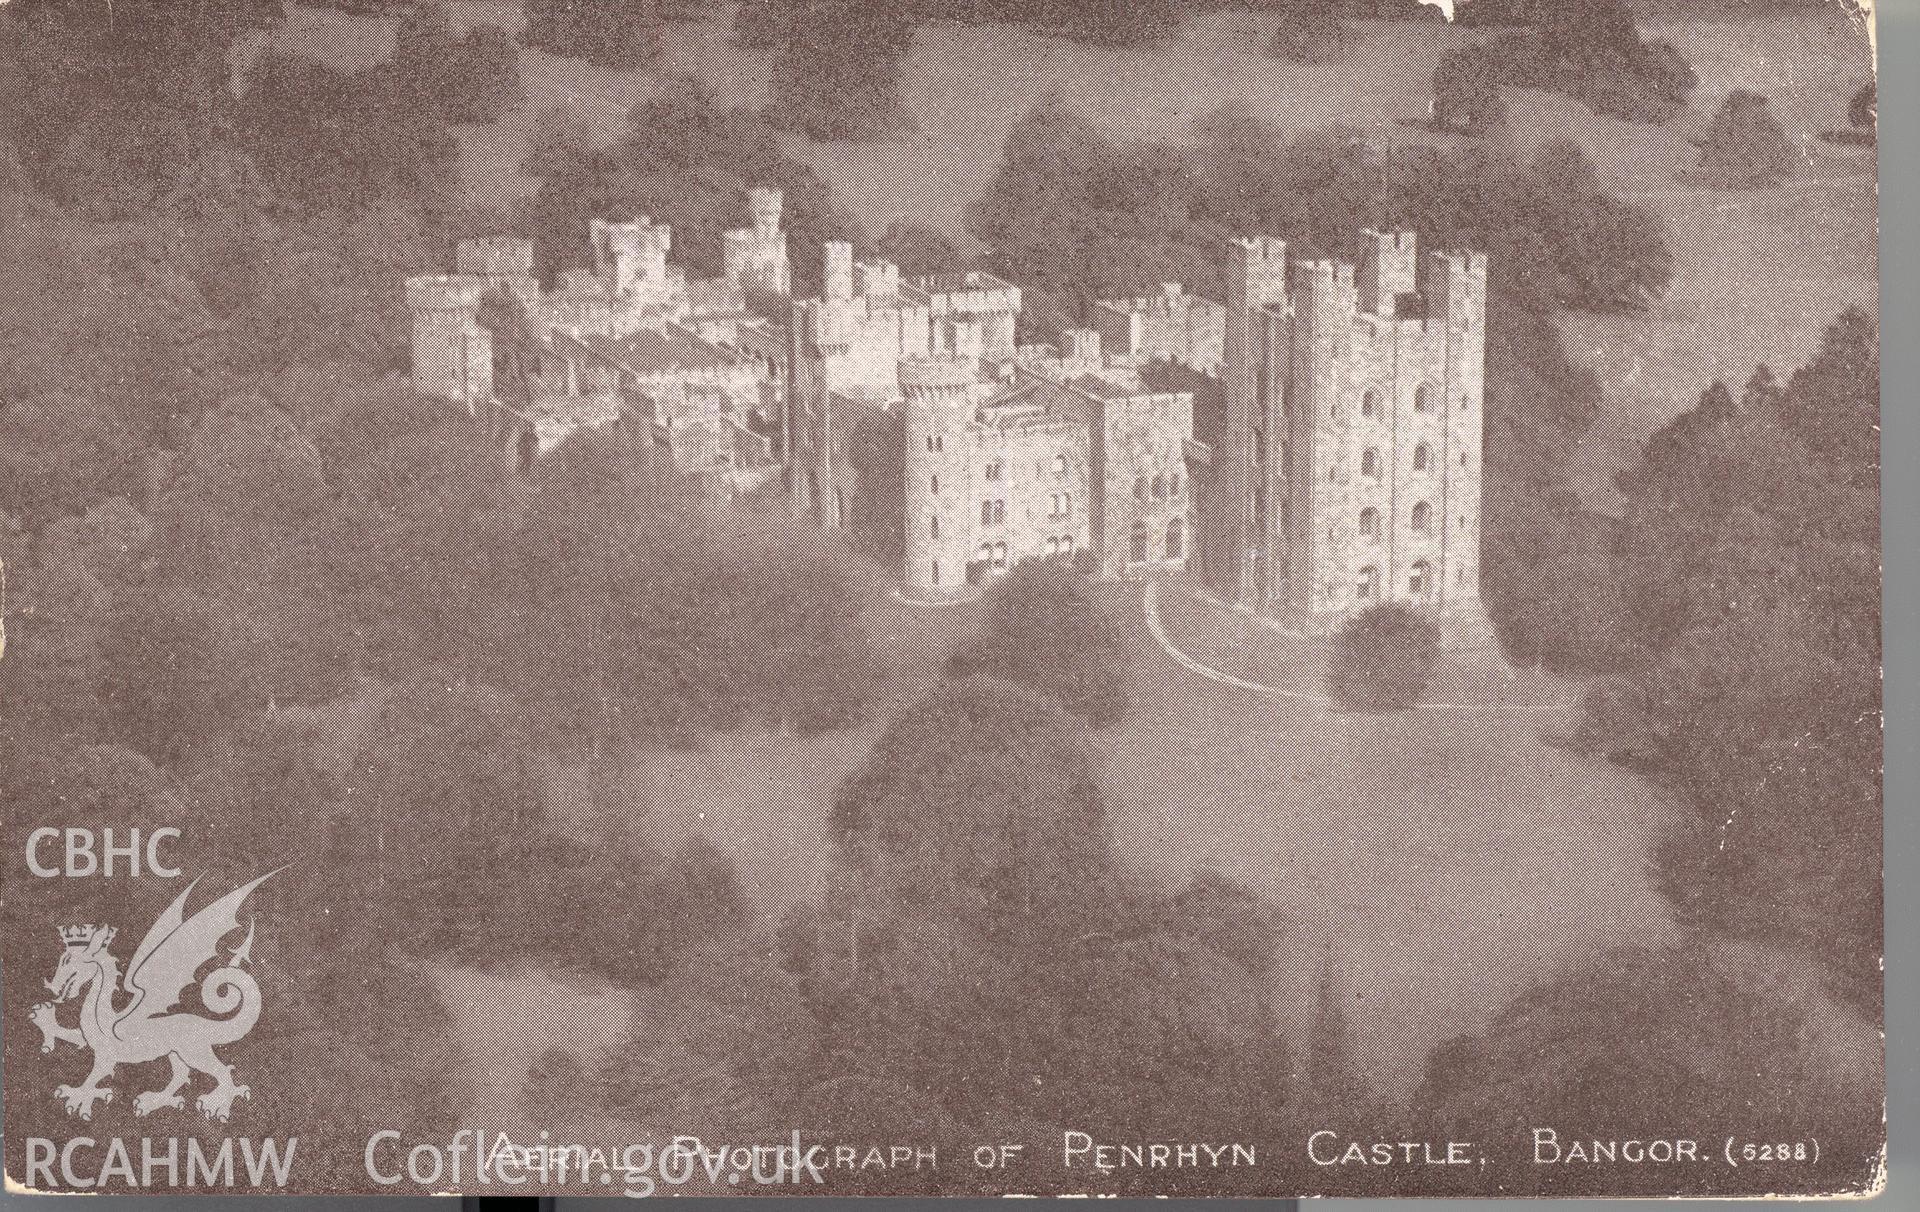 Digitised postcard image of aerial photo of Penrhyn Castle, Bangor. Produced by Parks and Gardens Data Services, from an original item in the Peter Davis Collection at Parks and Gardens UK. We hold only web-resolution images of this collection, suitable for viewing on screen and for research purposes only. We do not hold the original images, or publication quality scans.